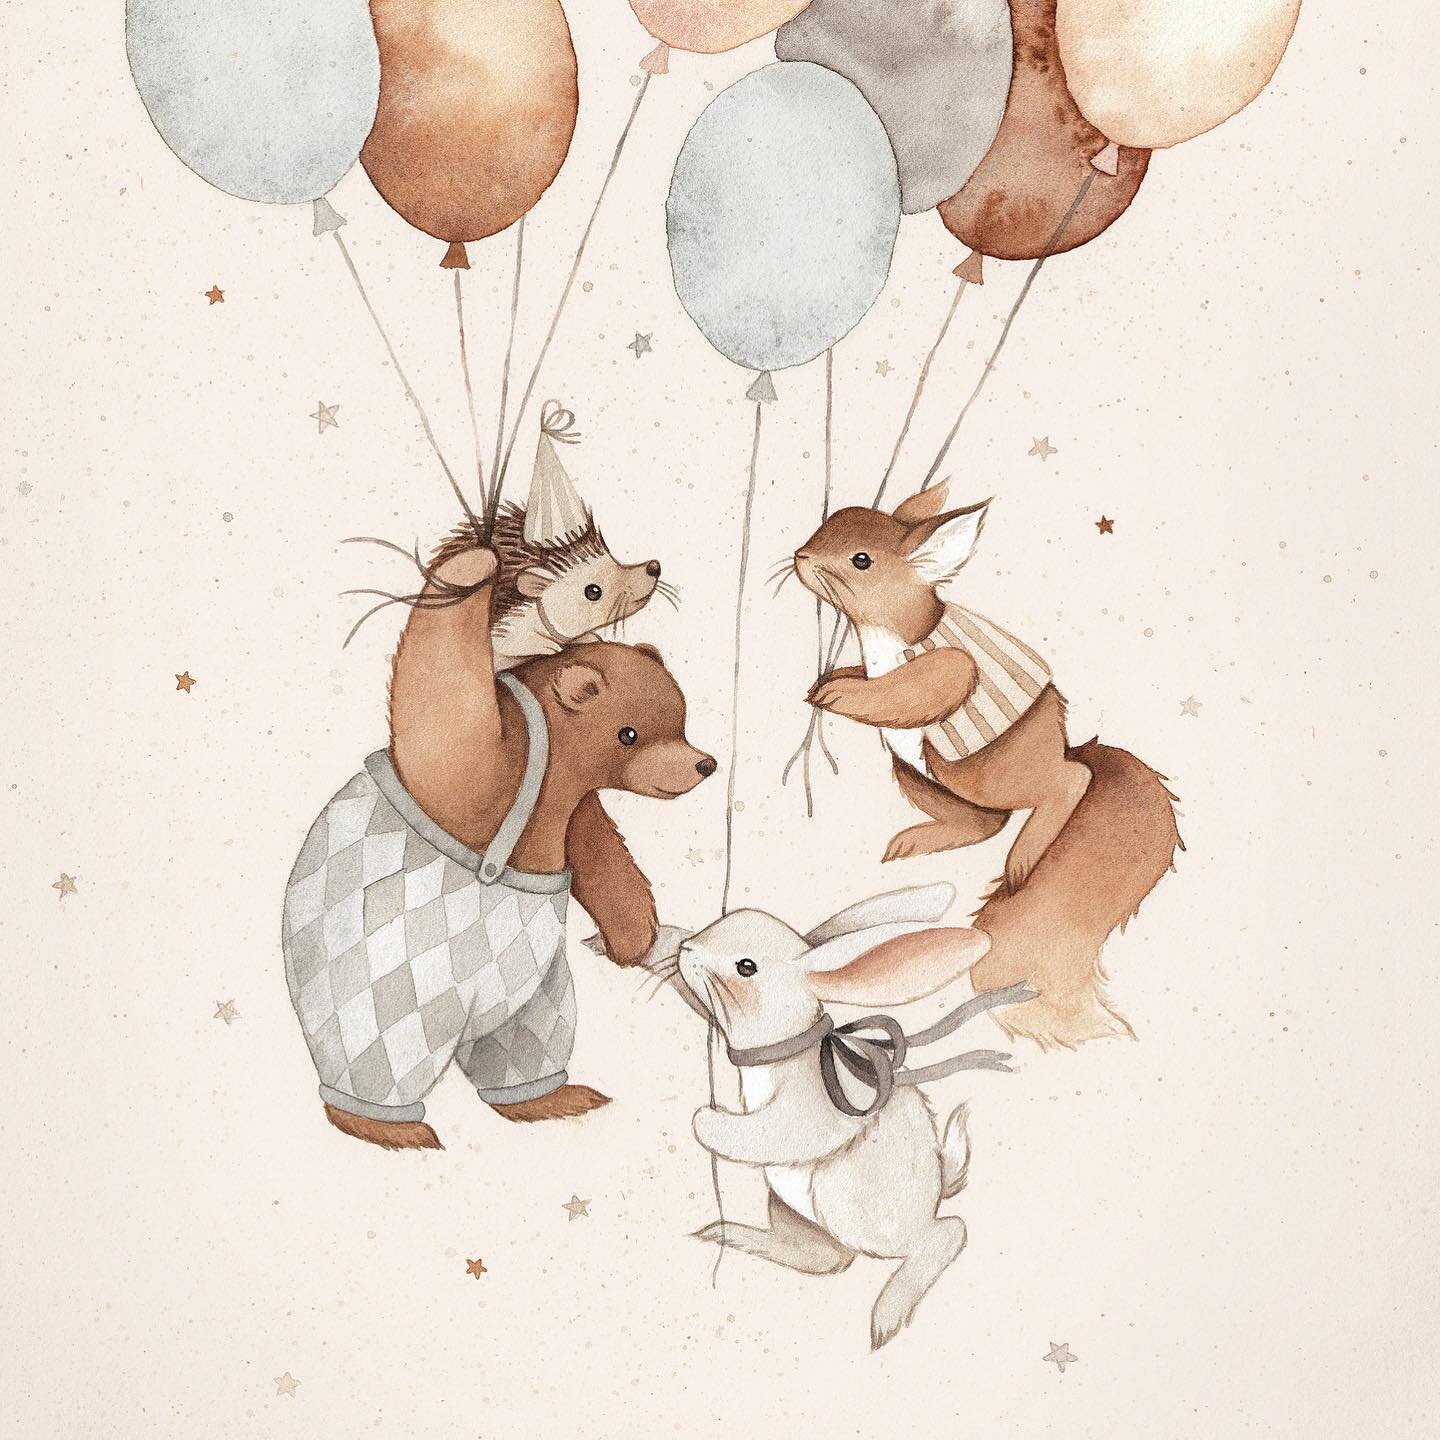 🎈Celebrating with my American friends today 🎈🤍 #happy #party #joy #congratulations #illustration #art #watercolors #balloon #animals #celebration #celebrate